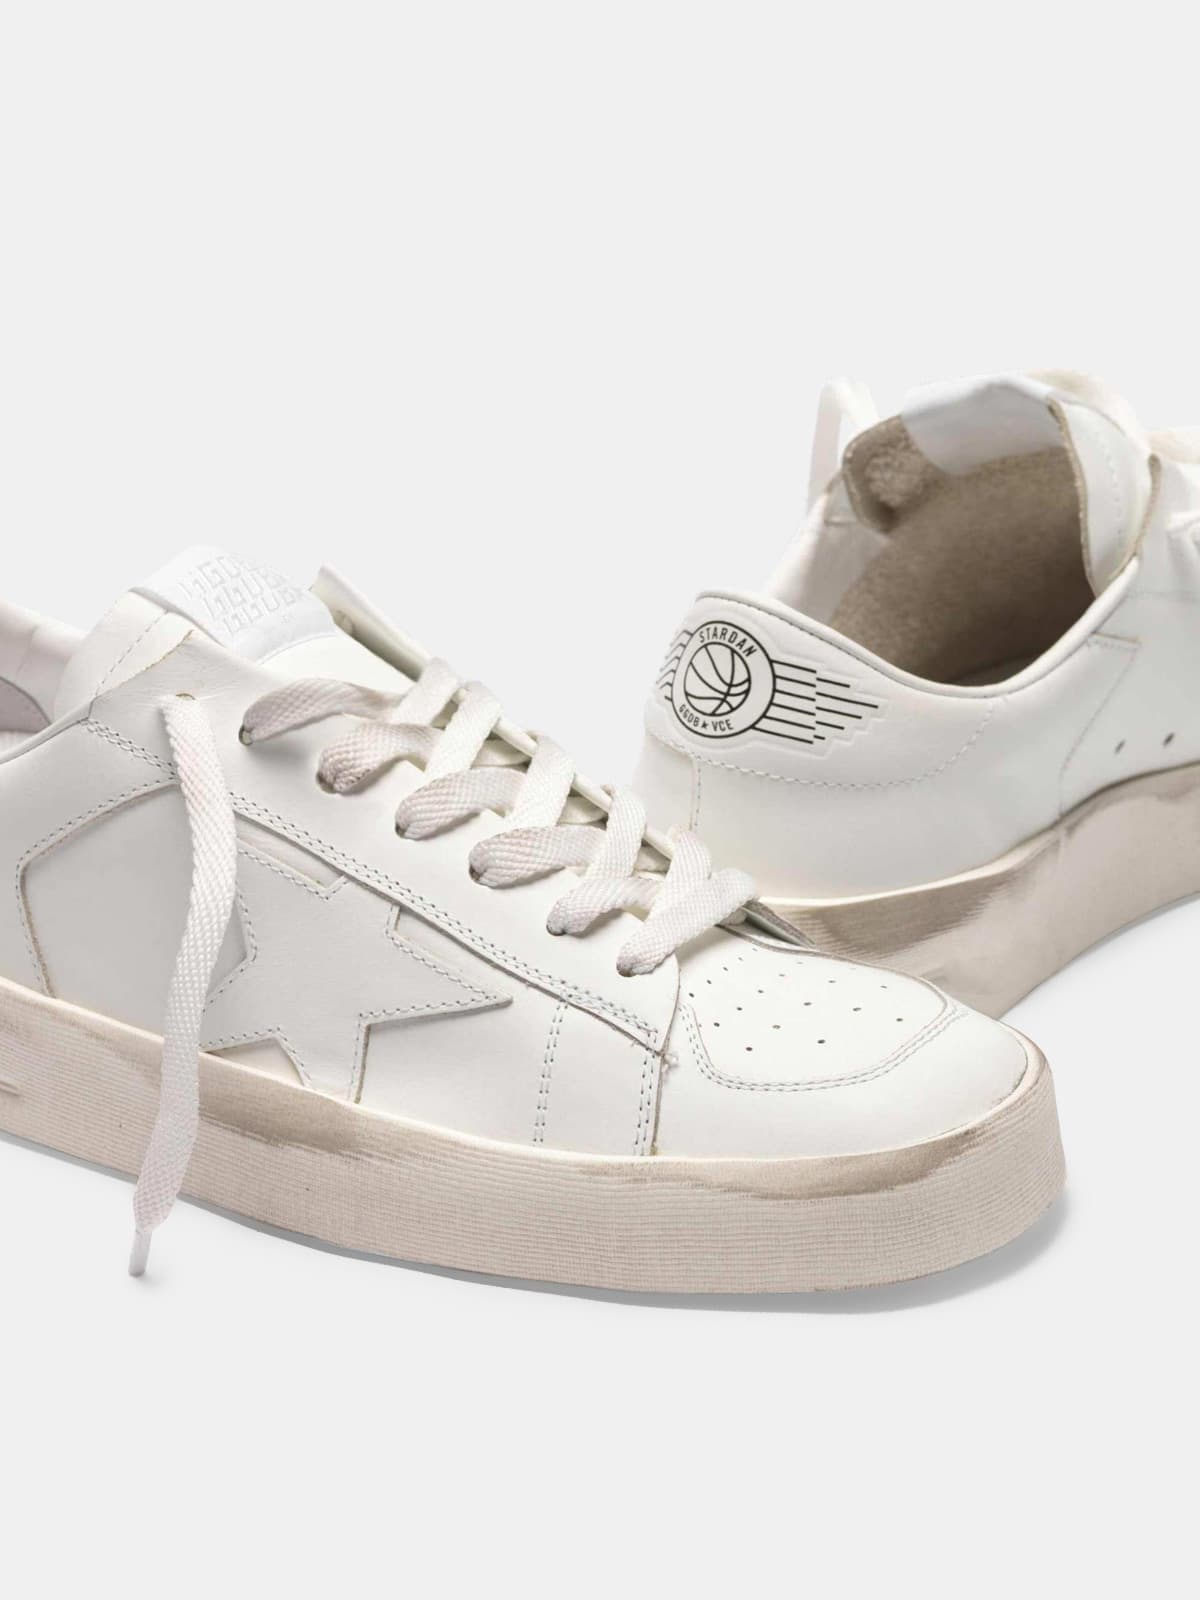 Stardan sneakers in total white leather | Golden Goose